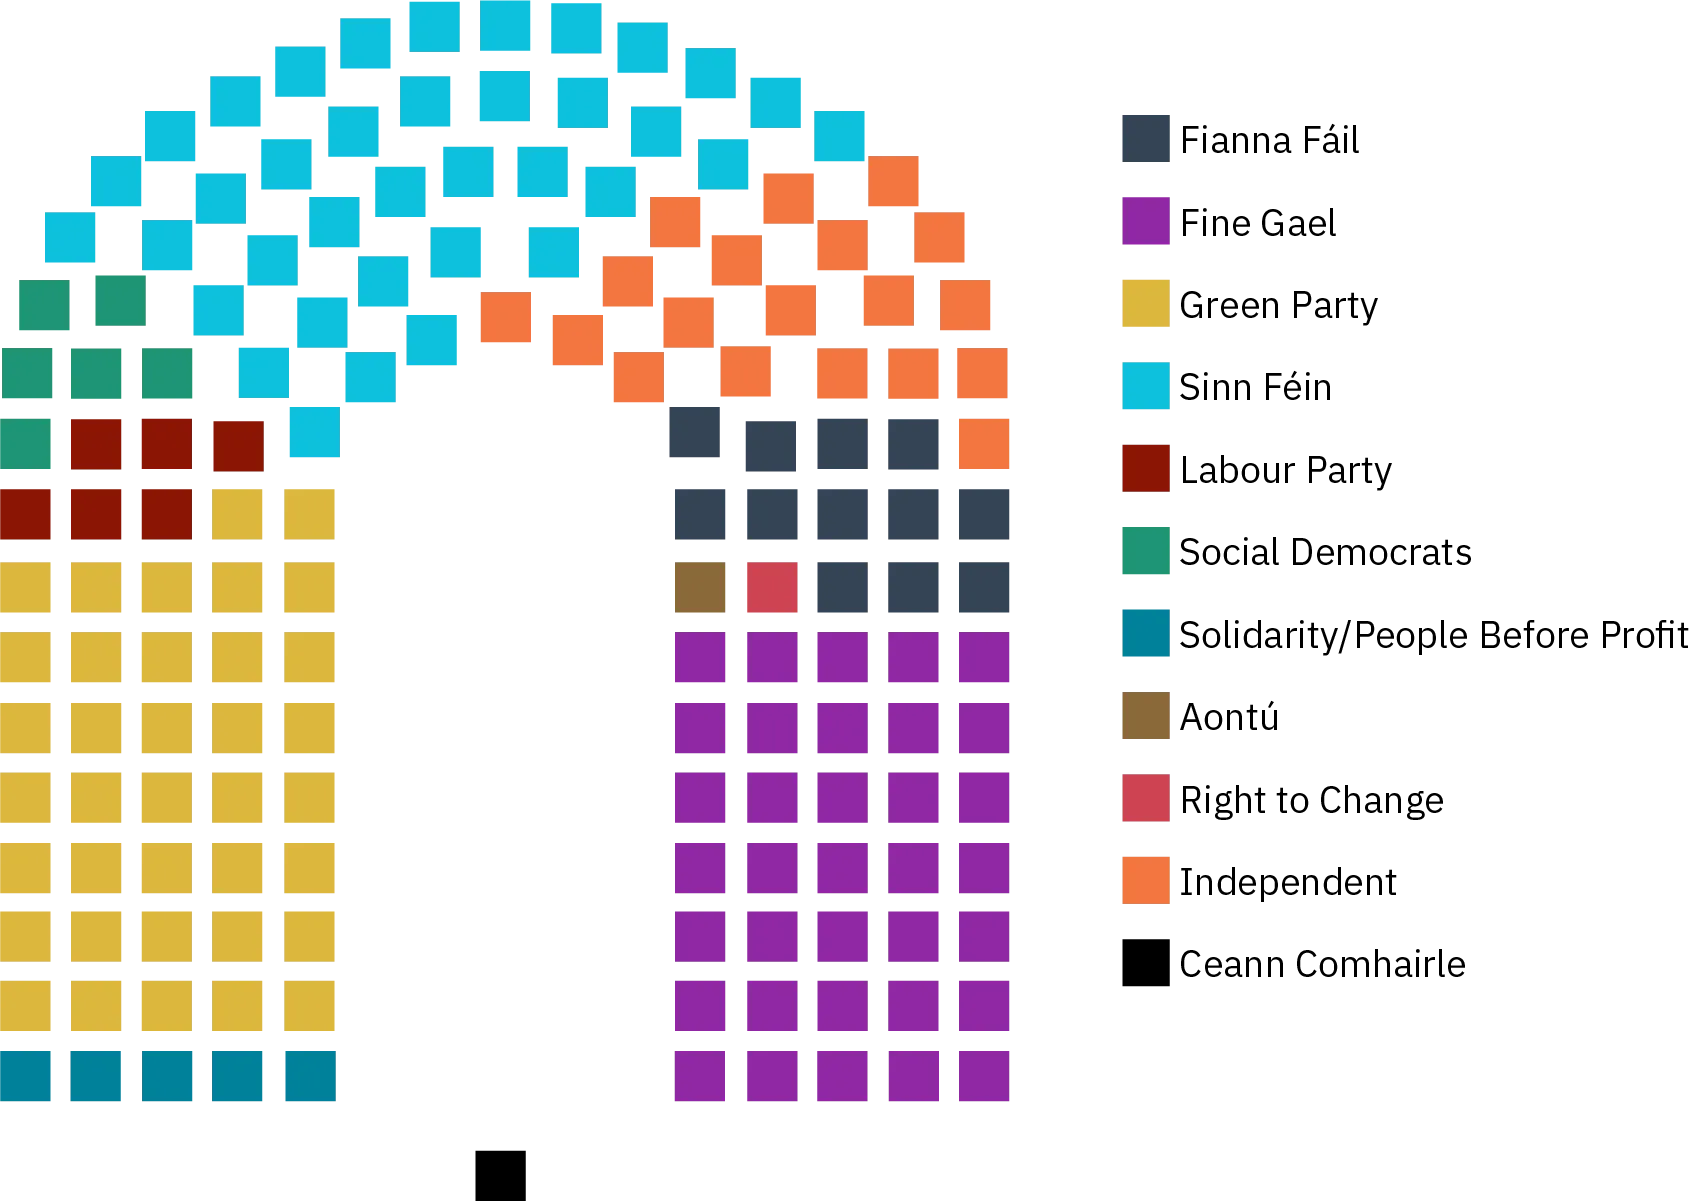 Squares arranged in an upside-down U-shape show the distribution of seats and party diversity in the lower chamber of the Irish parliament following the 2020 elections. Fine Gael, Sinn Féin, and the Green Party held the most seats. Independents and Fianna Fáil held more than 10 seats each, and five other distinct groups also held seats.